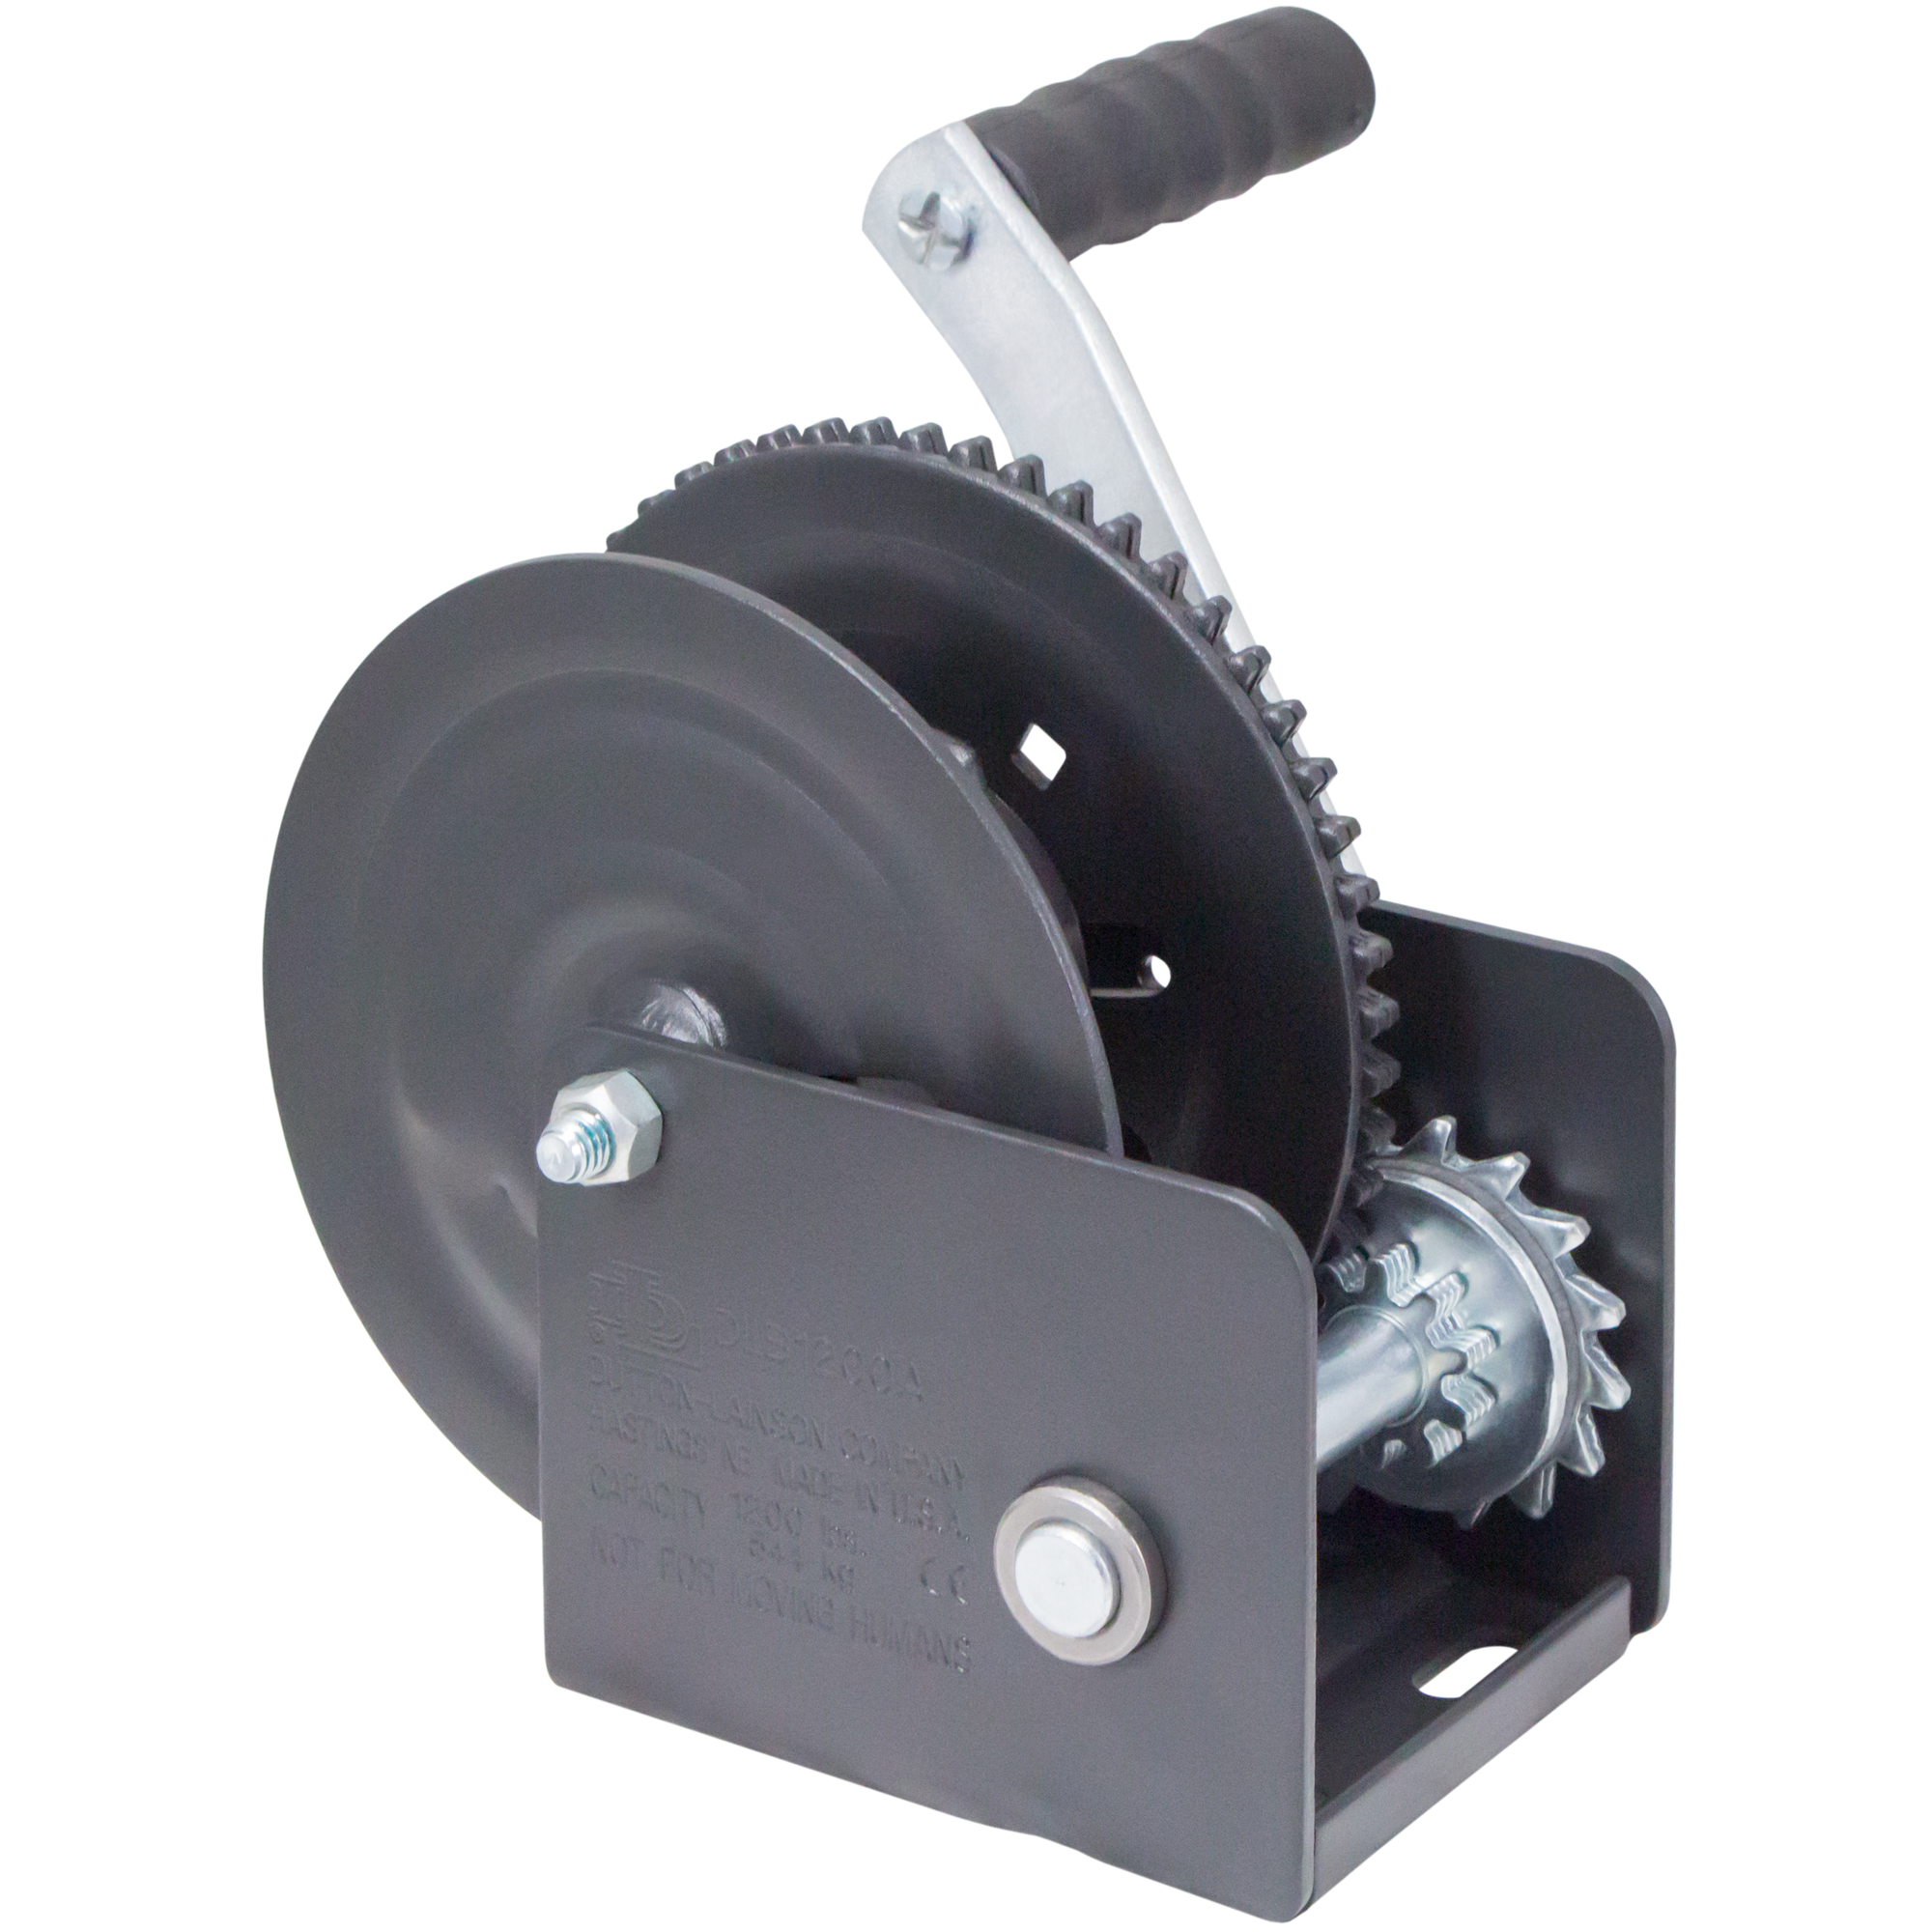 Dutton-Lainson Single Speed Hand Winch with Automatic Brake, 1200-Lb. Capacity, Model DLB1200A